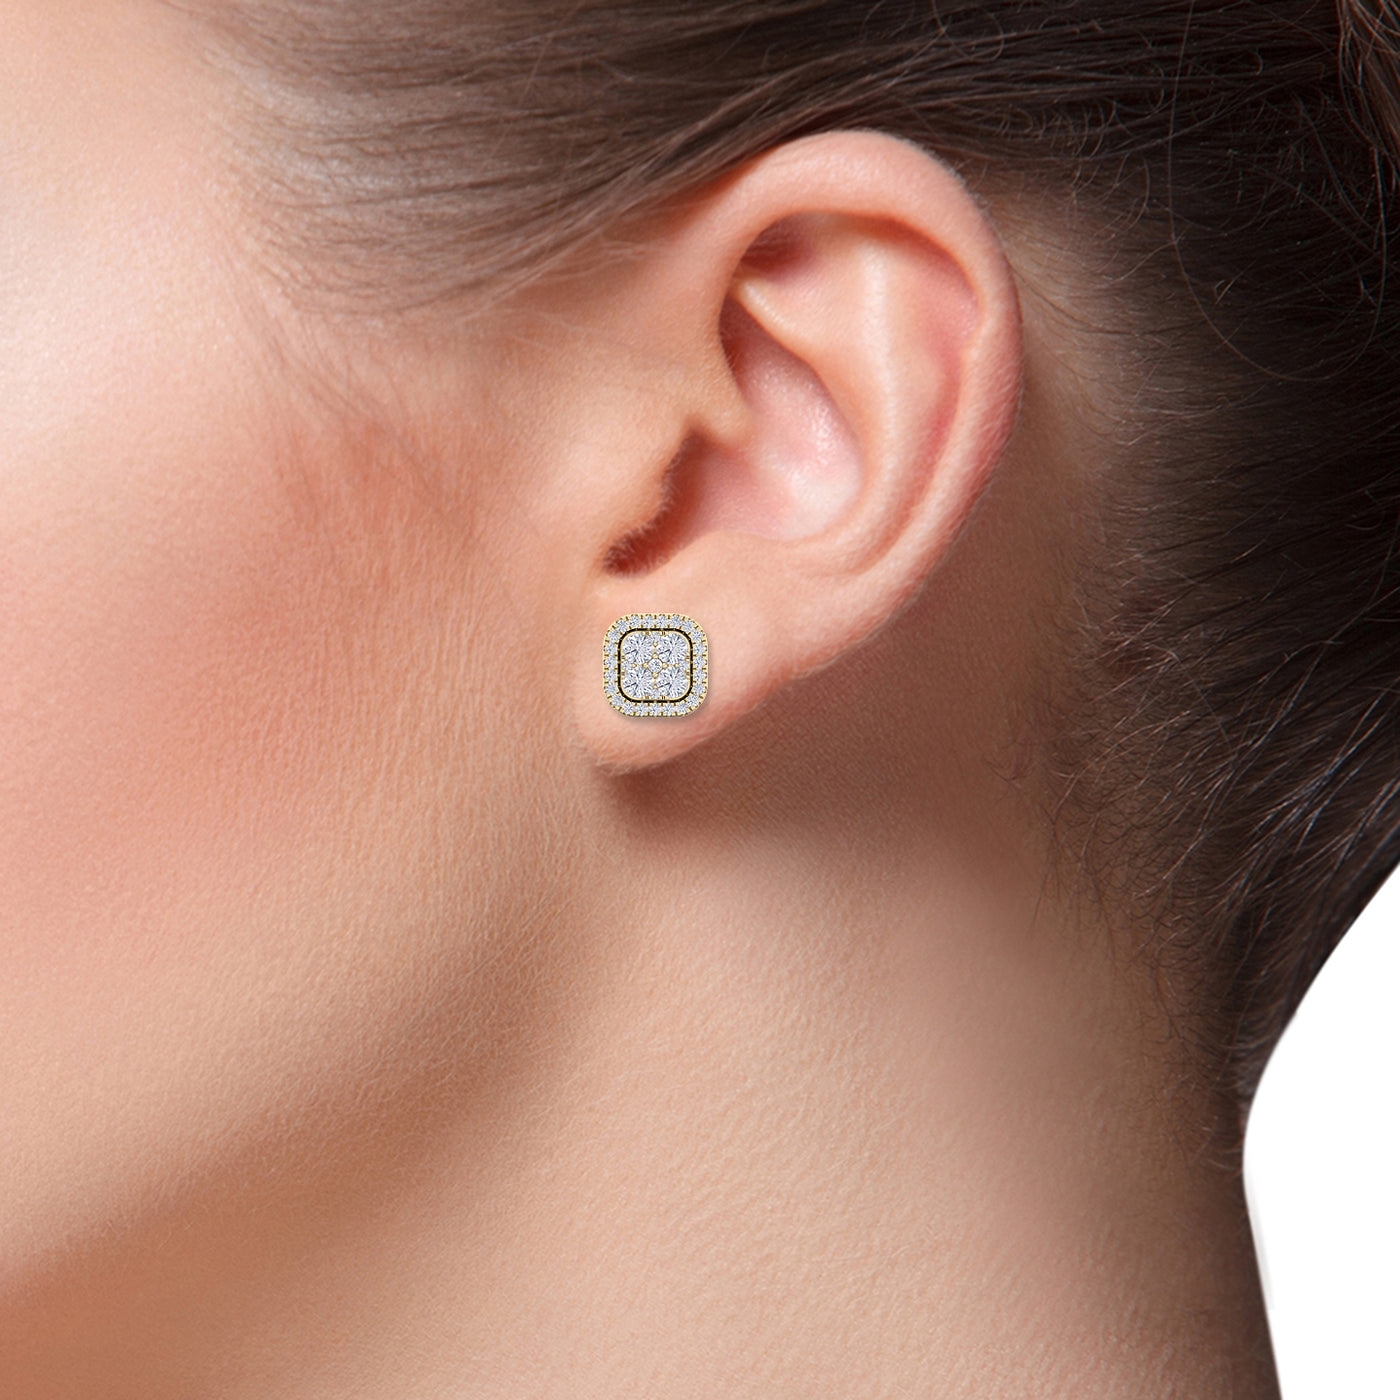 Square cluster stud earrings in rose gold with white diamonds of 1.00 ct in weight
